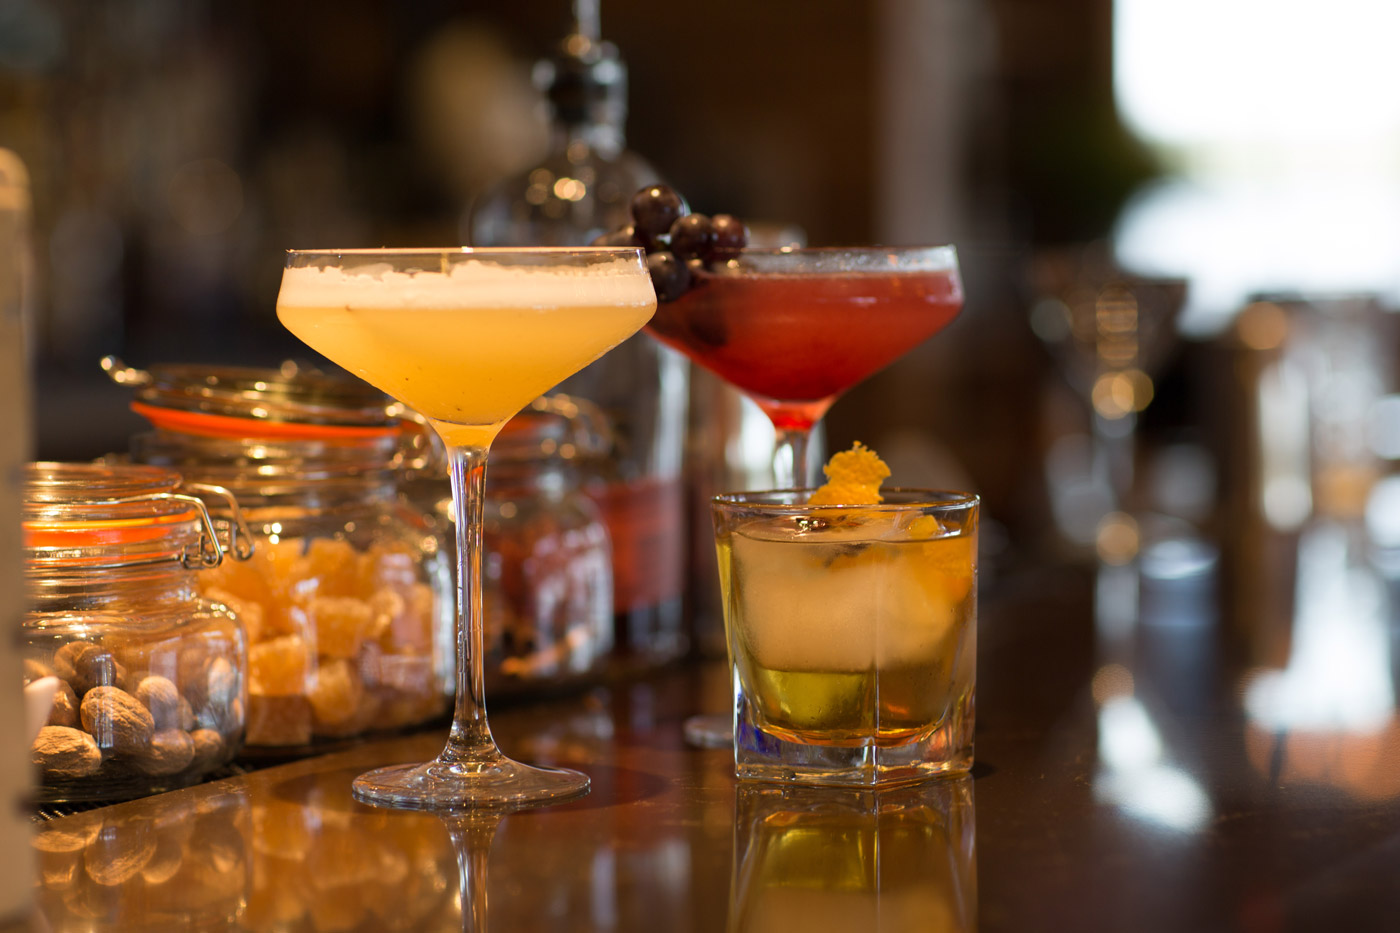 Image of 3 cocktails sitting on the bar